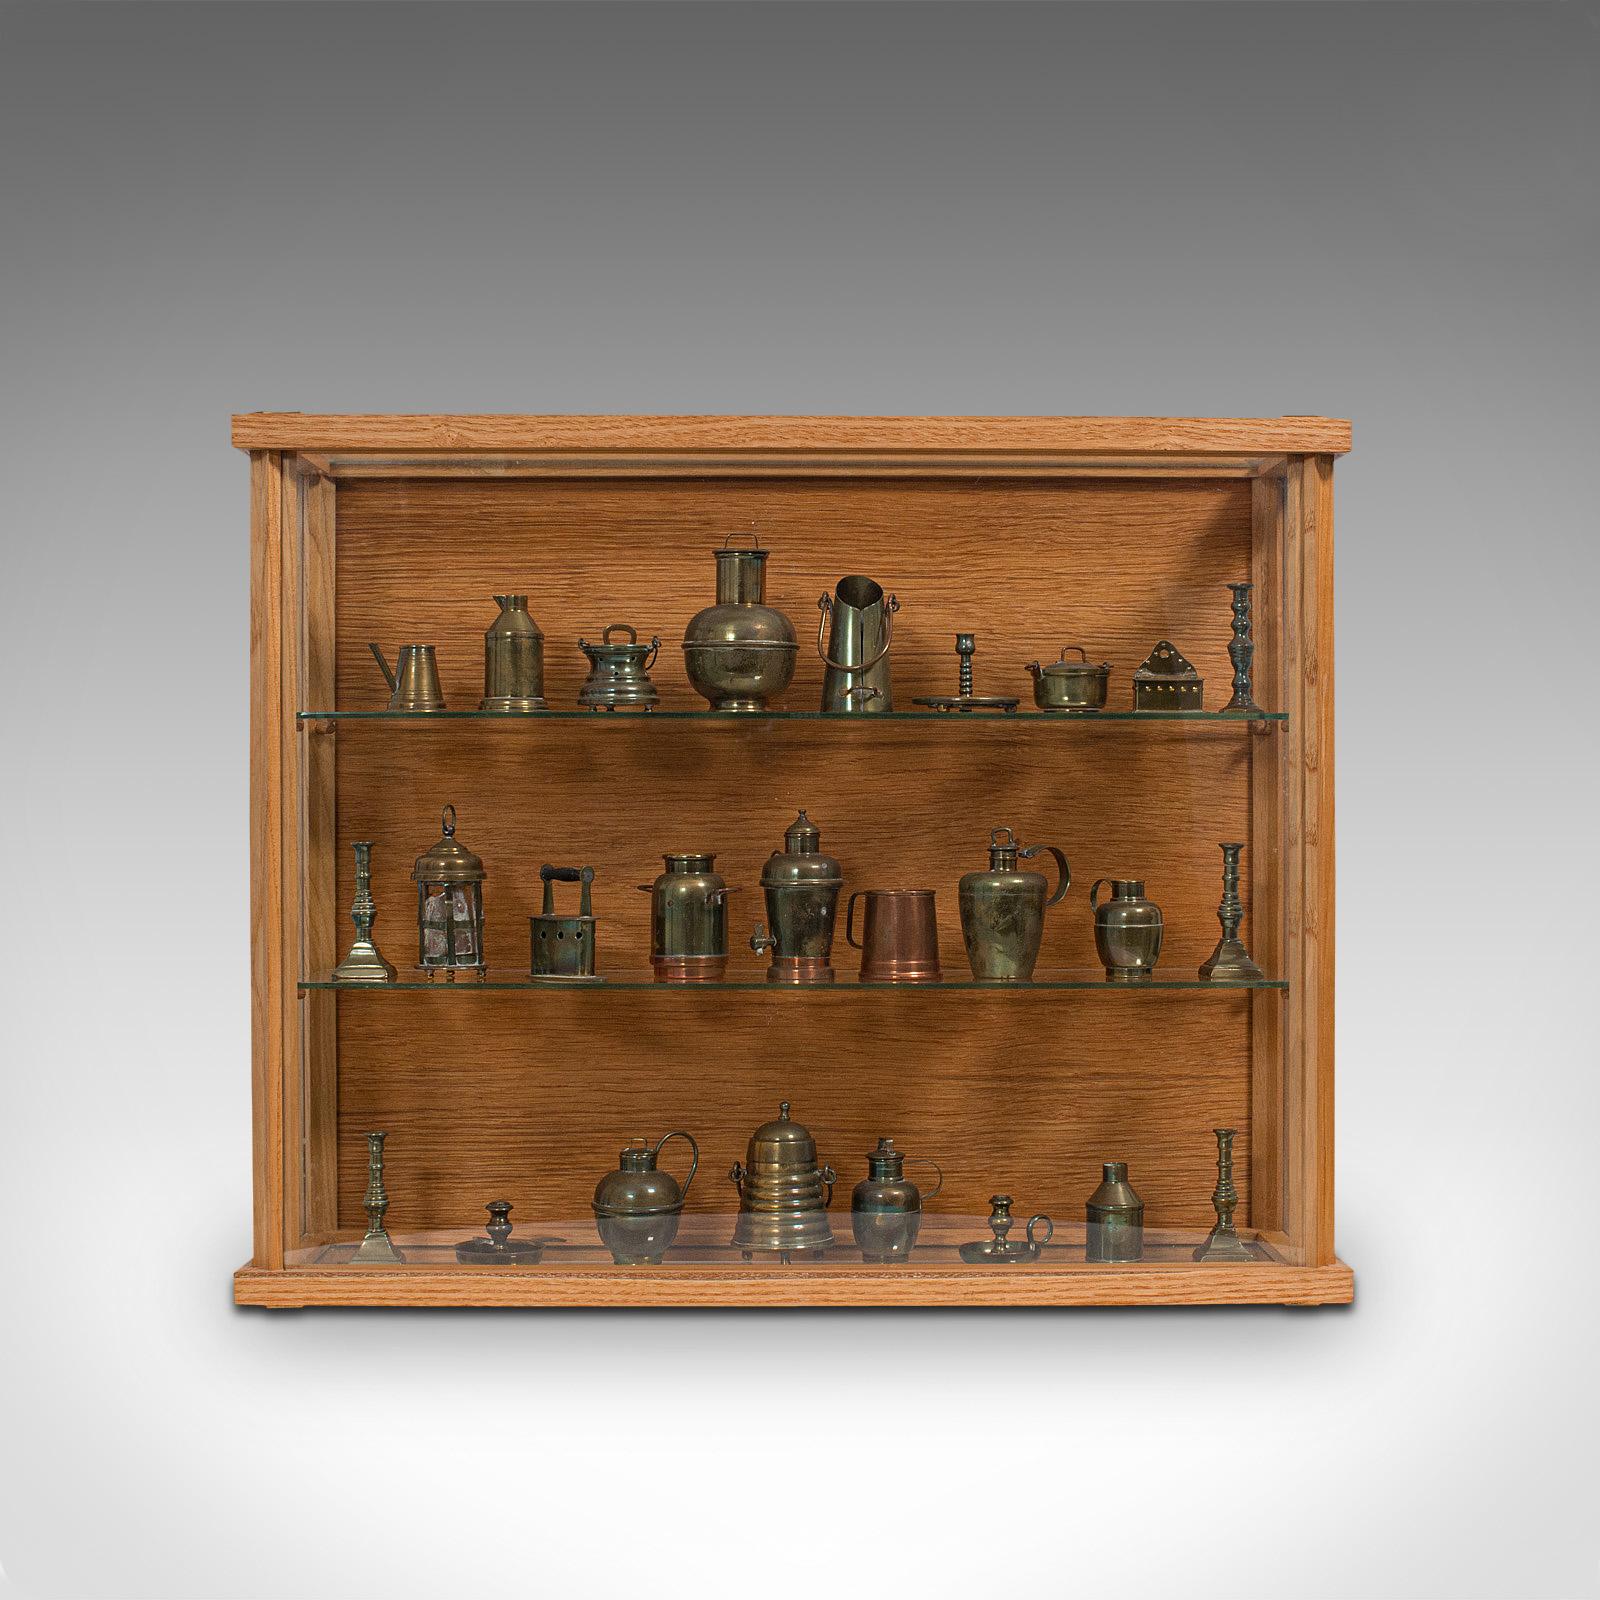 This is a charming antique showcase collection of miniatures. An English, brass and copper set of Victorian collectibles with later display cabinet, dating to the late 19th century and later, circa 1900.

Diminutive but fascinating collection of